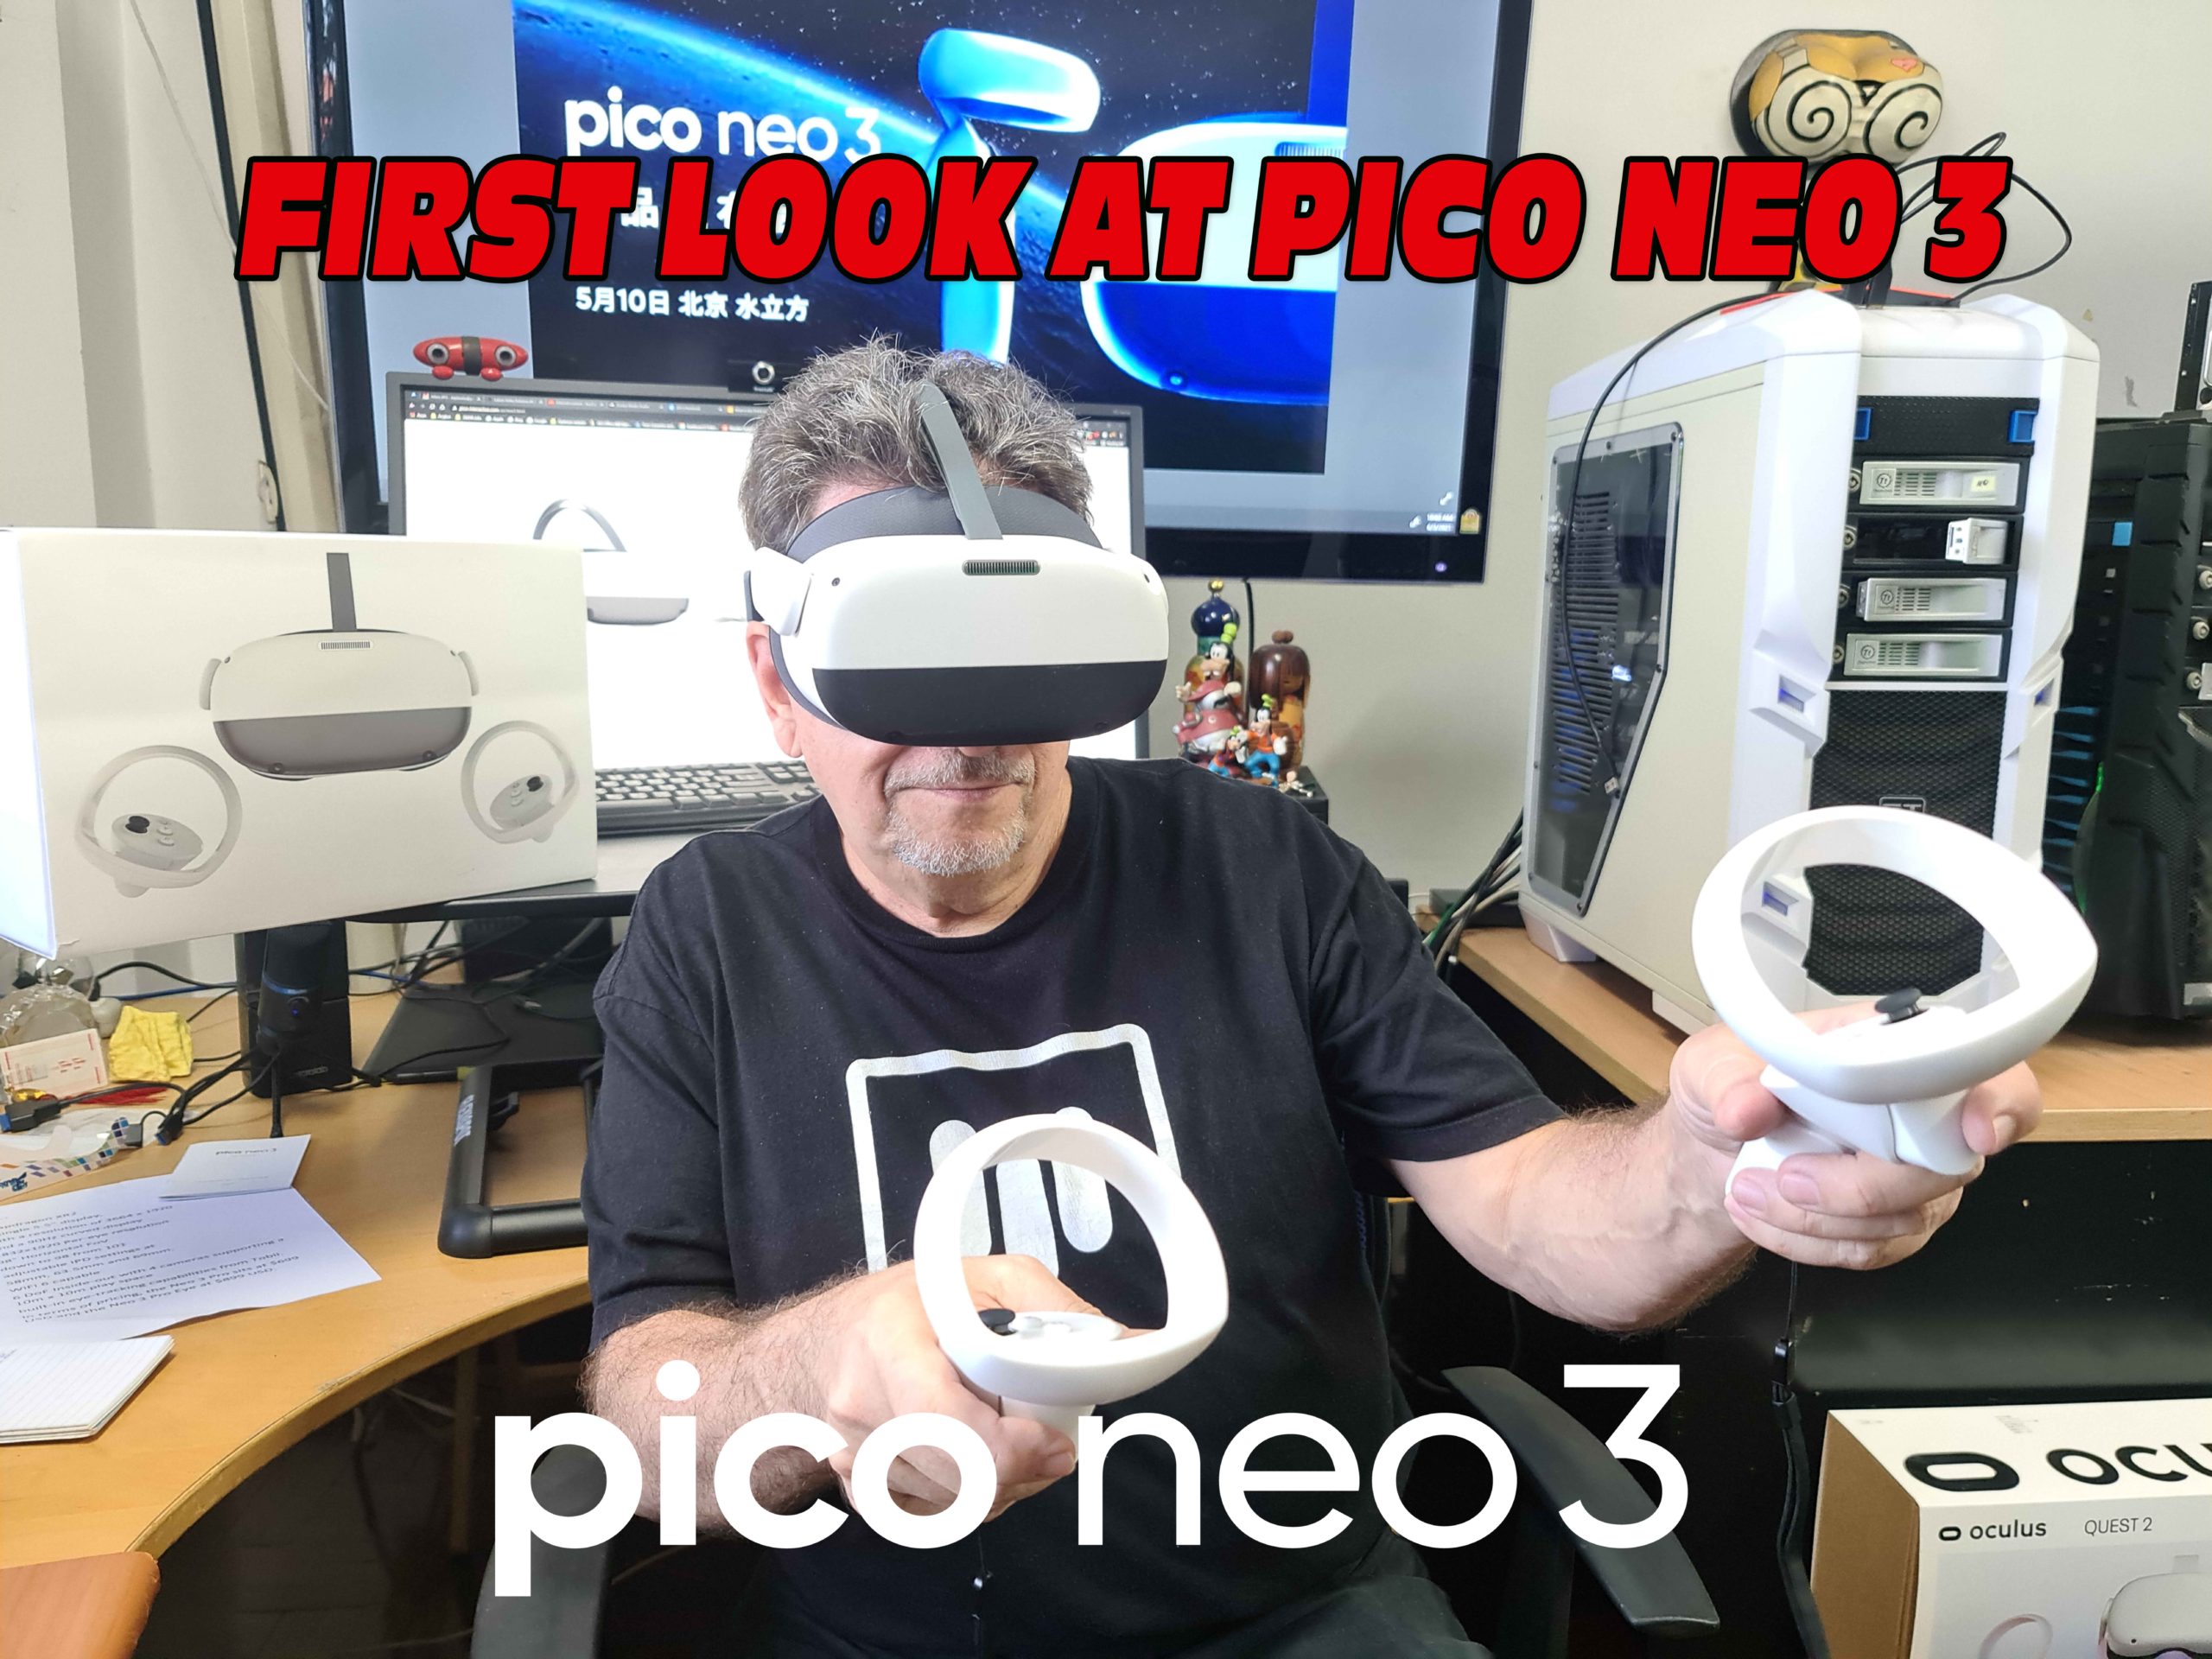 UNBOXING The Pico Neo 3 VR Headset